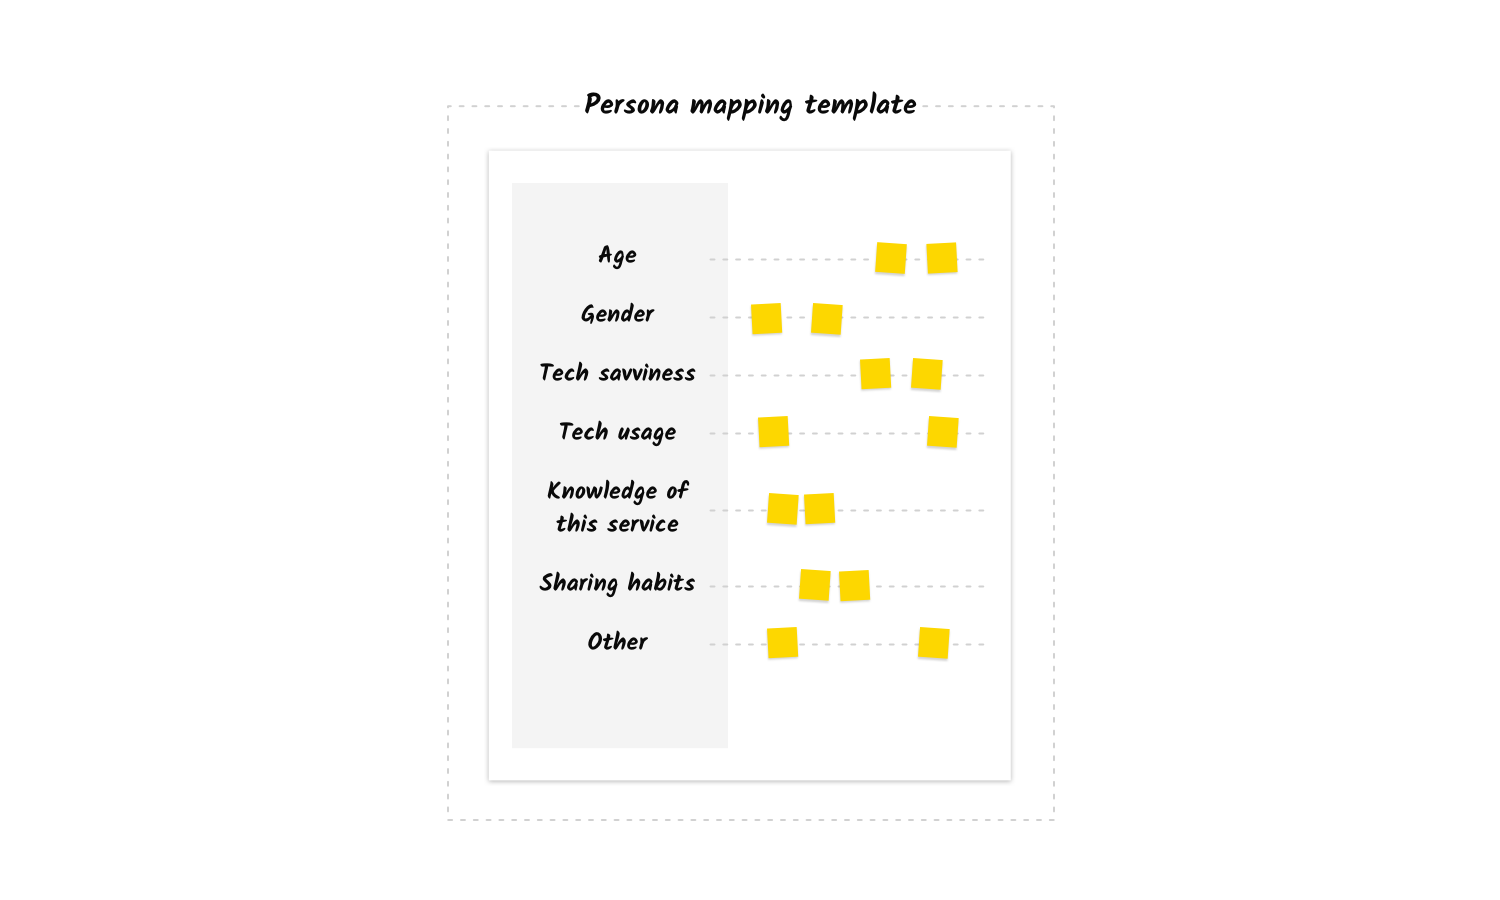 Persona mapping